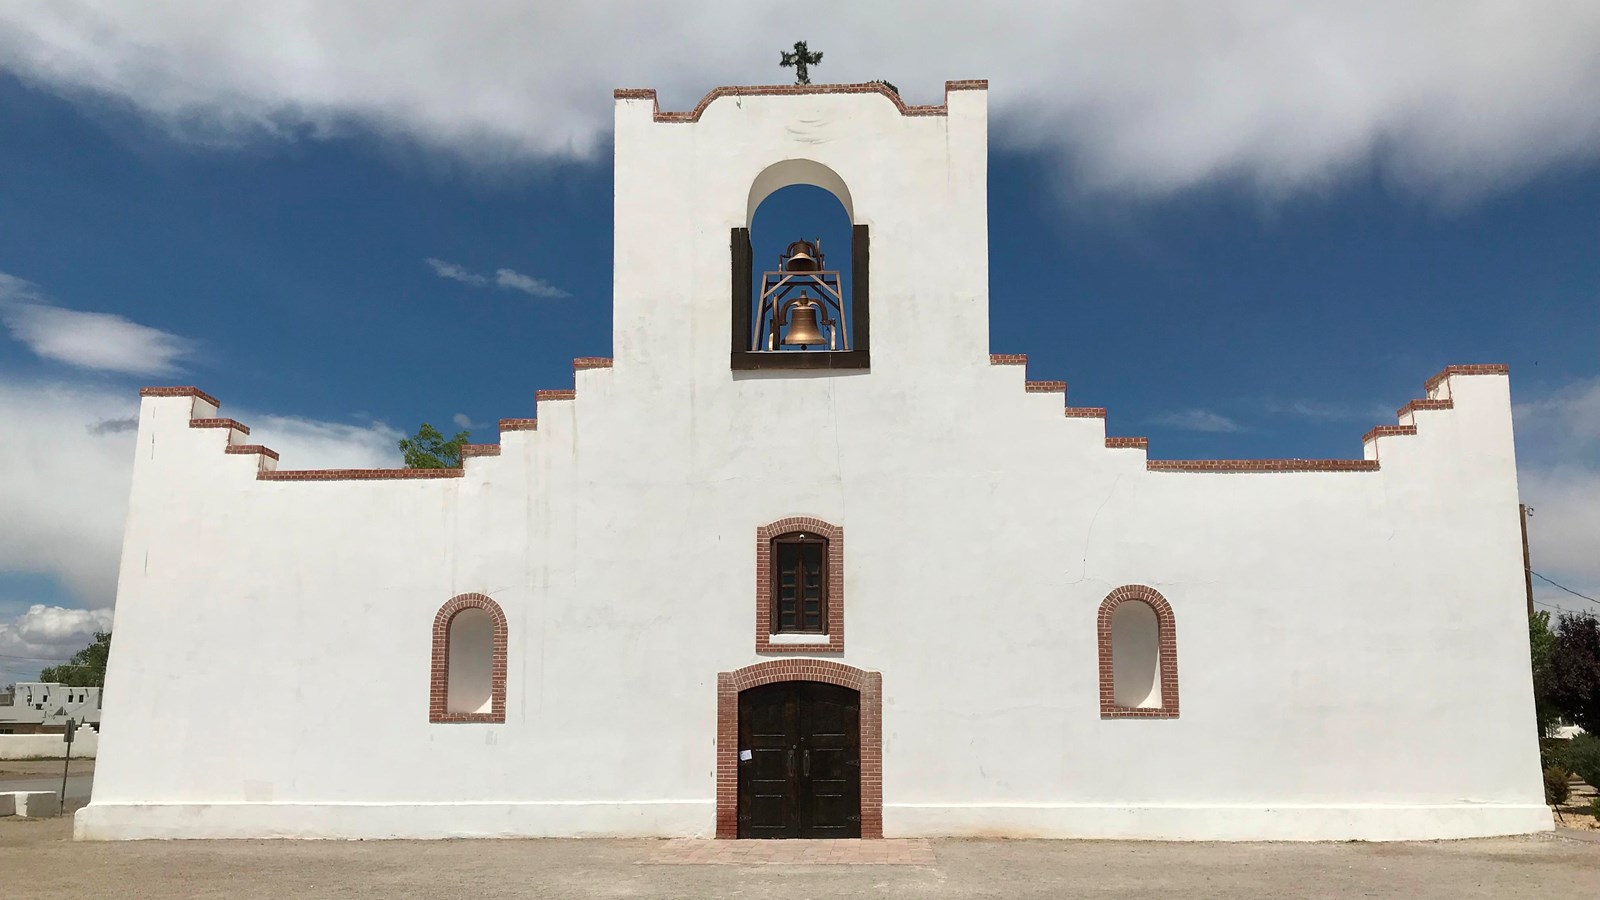 A white stucco mission with a single bell tower.